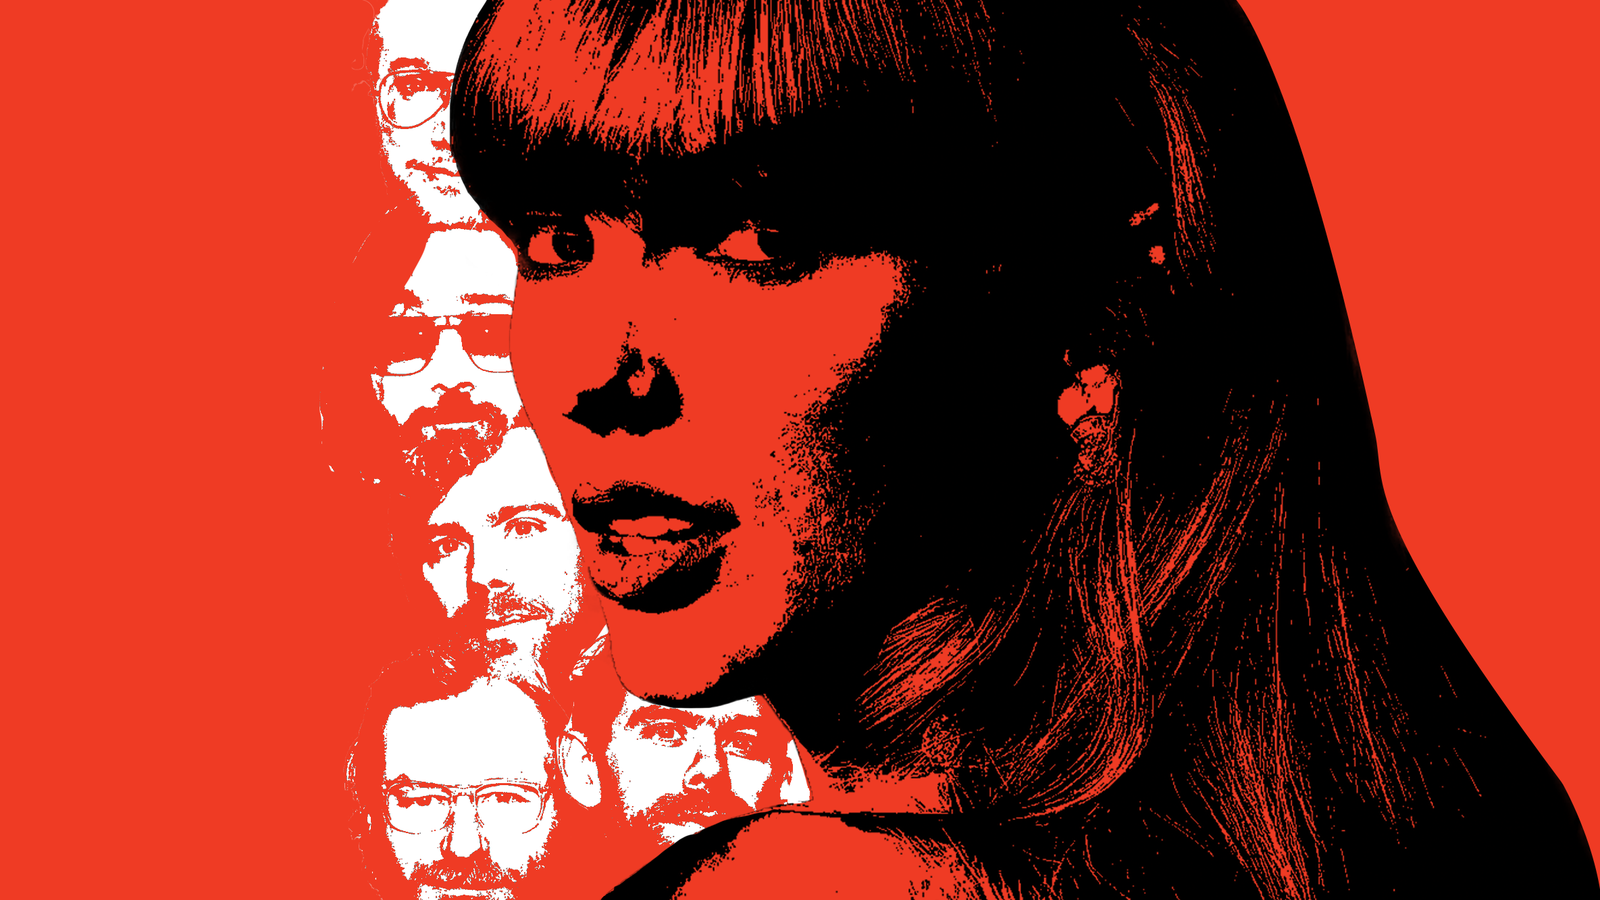 taylor swift drawings red